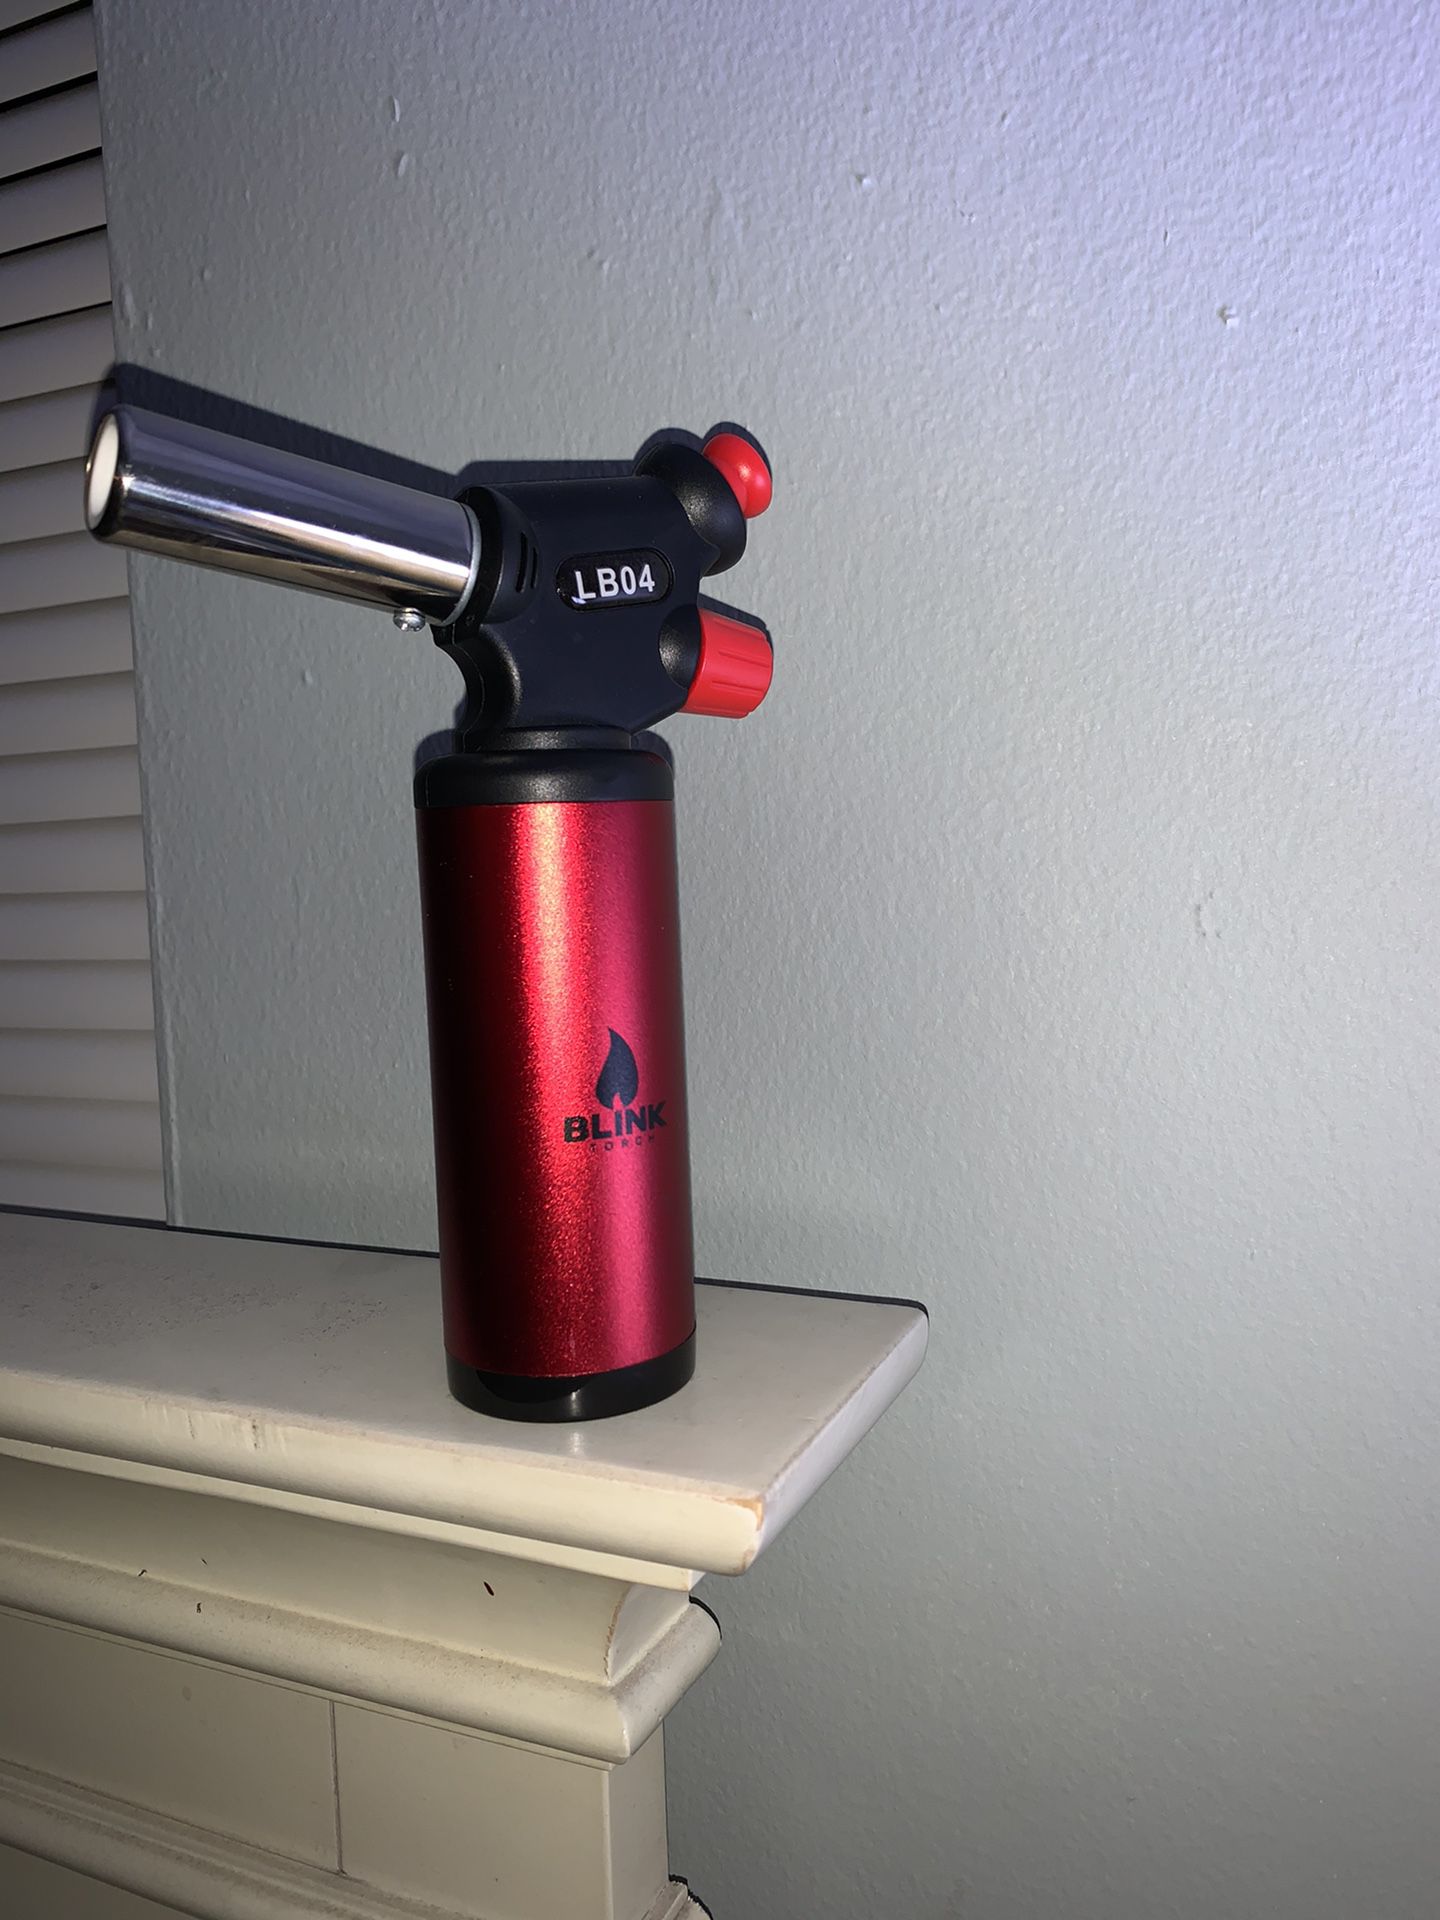 Blink. Red butane torch. Barely used. Dabs.